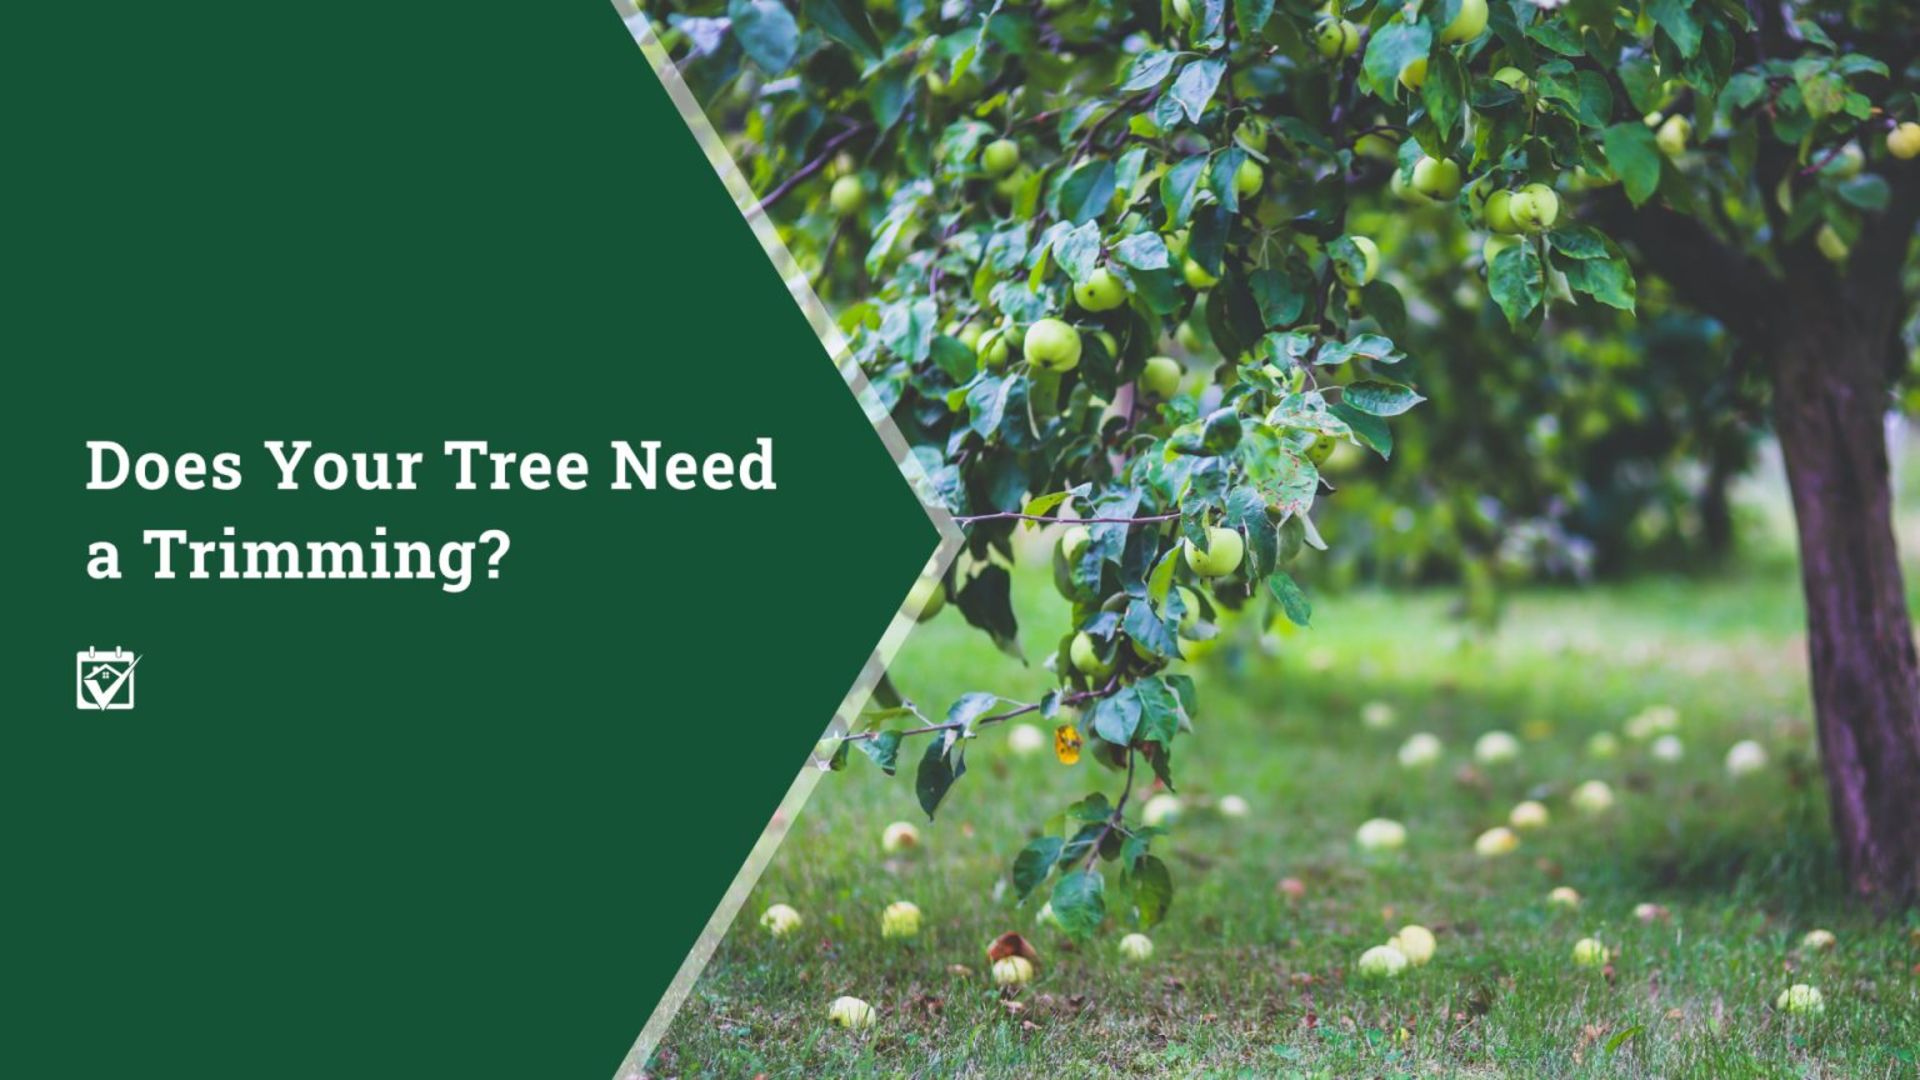 Does Your Tree Need Trimming?